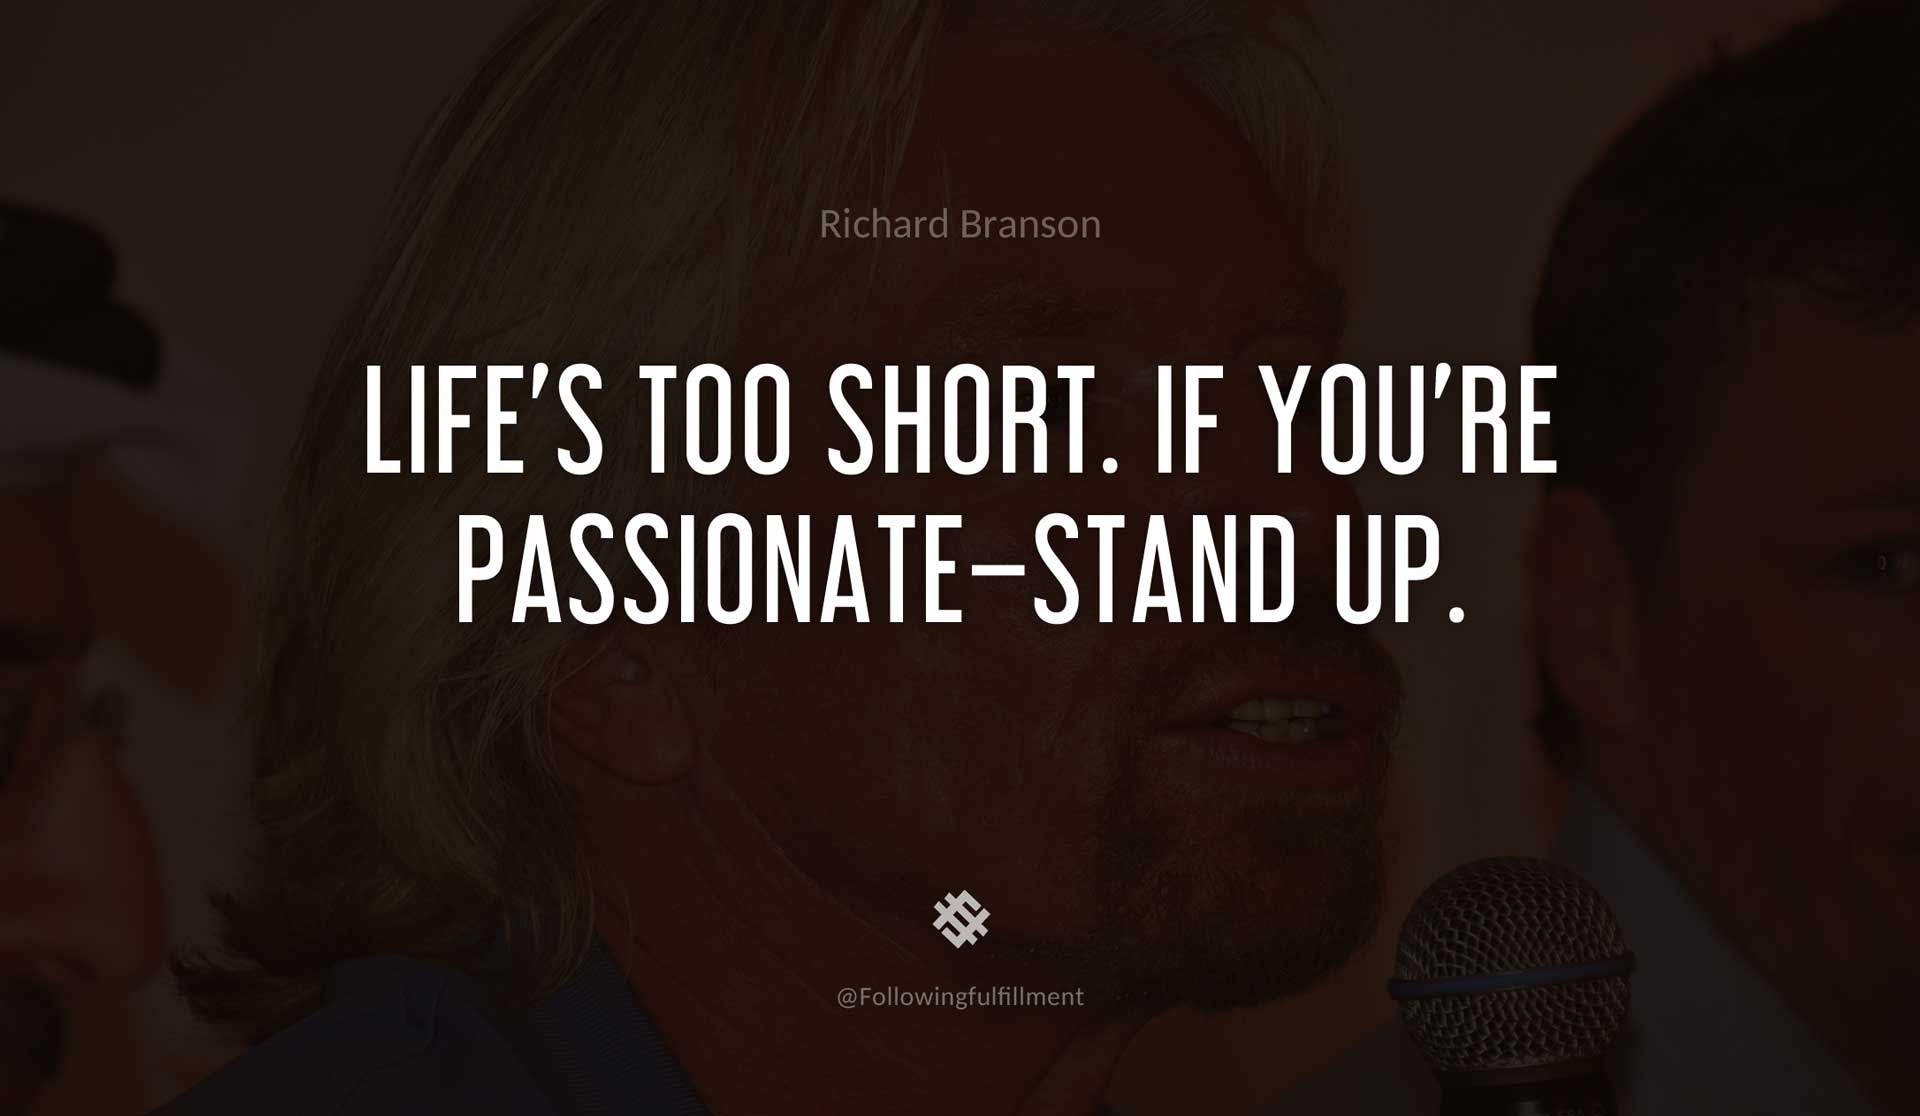 Life's-too-short.-If-you're-passionate-stand-up.--RICHARD-BRANSON-Quote.jpg